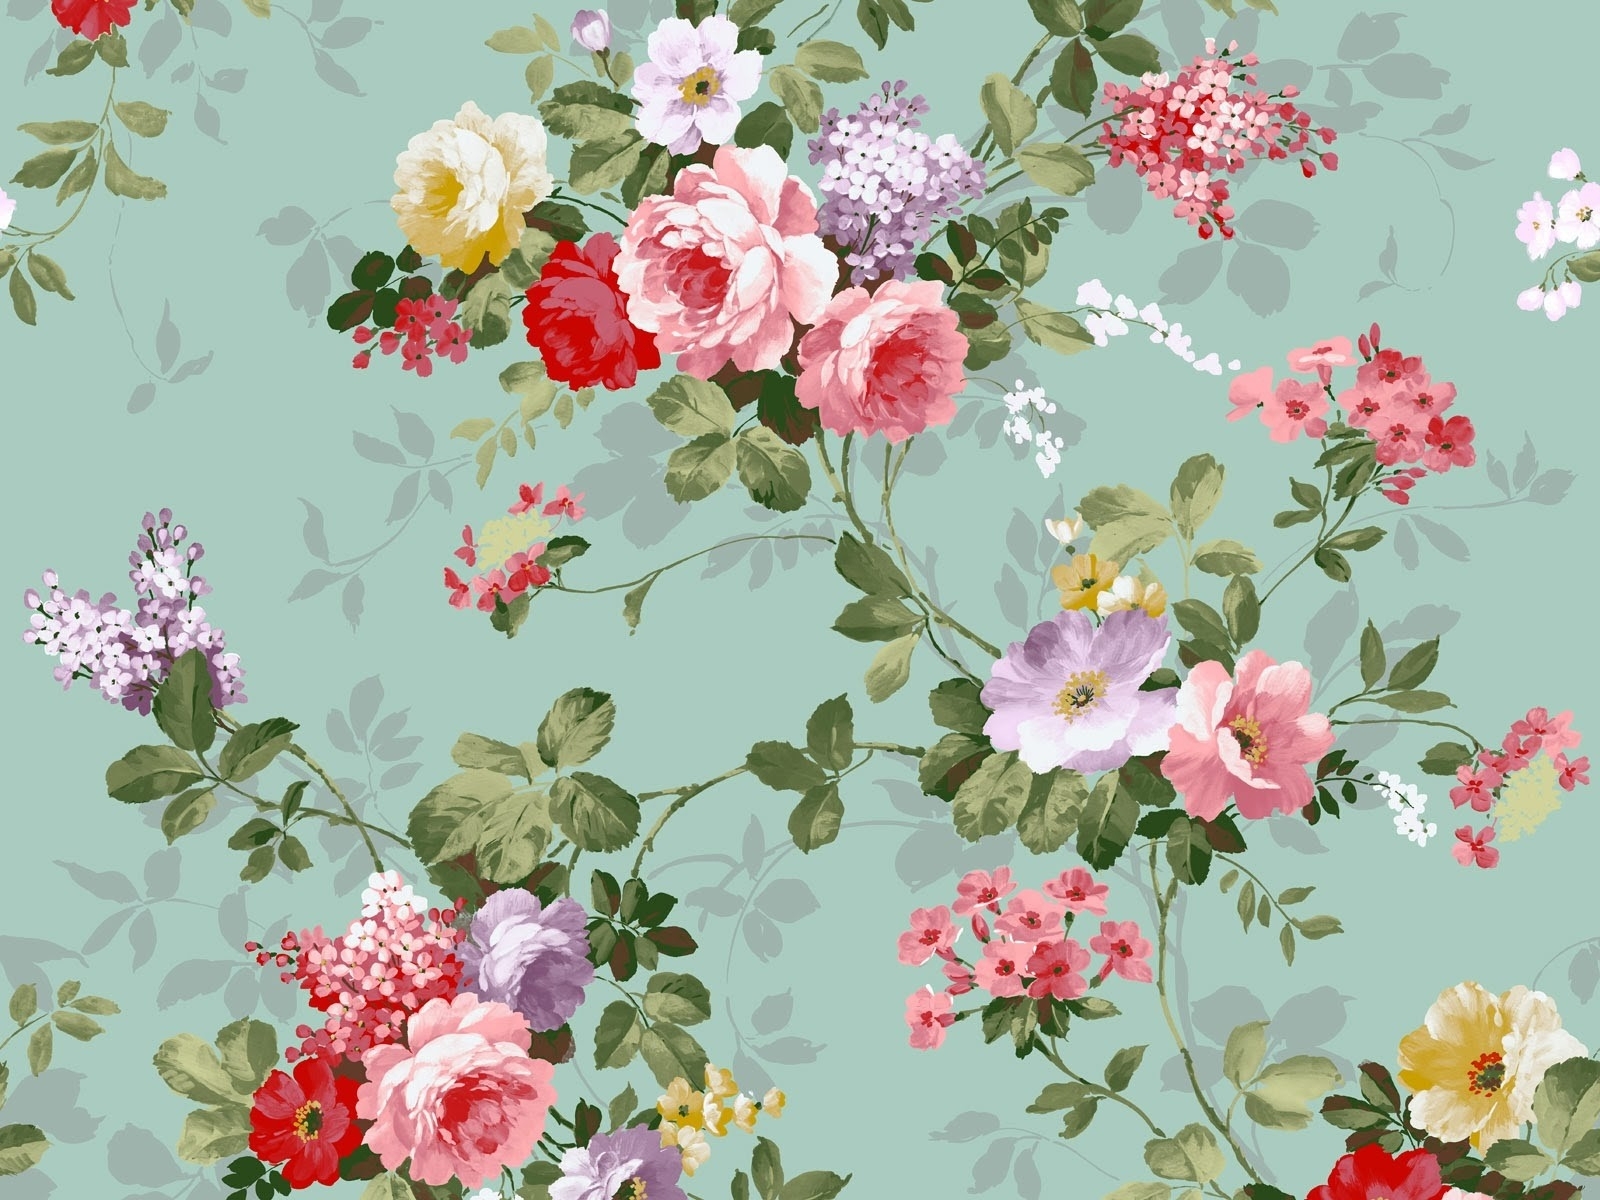 10 Most Popular Old Fashioned Floral Wallpaper FULL HD 1080p For PC Desktop